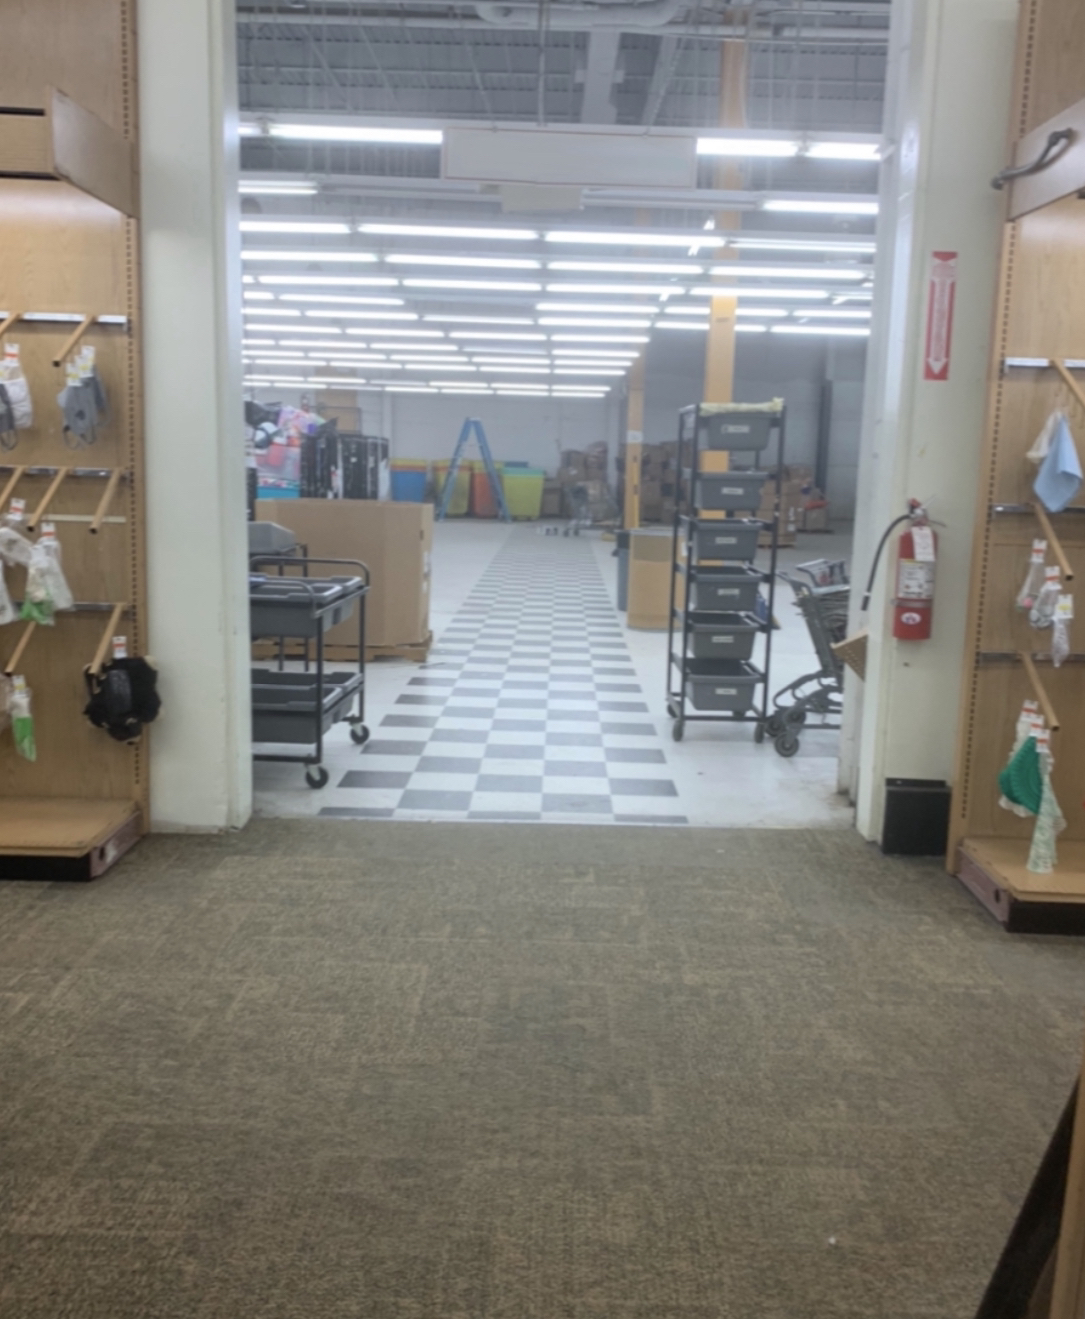 I noclipped into the backrooms, but I don't think I'm in level 0 What do  I do? : r/backrooms